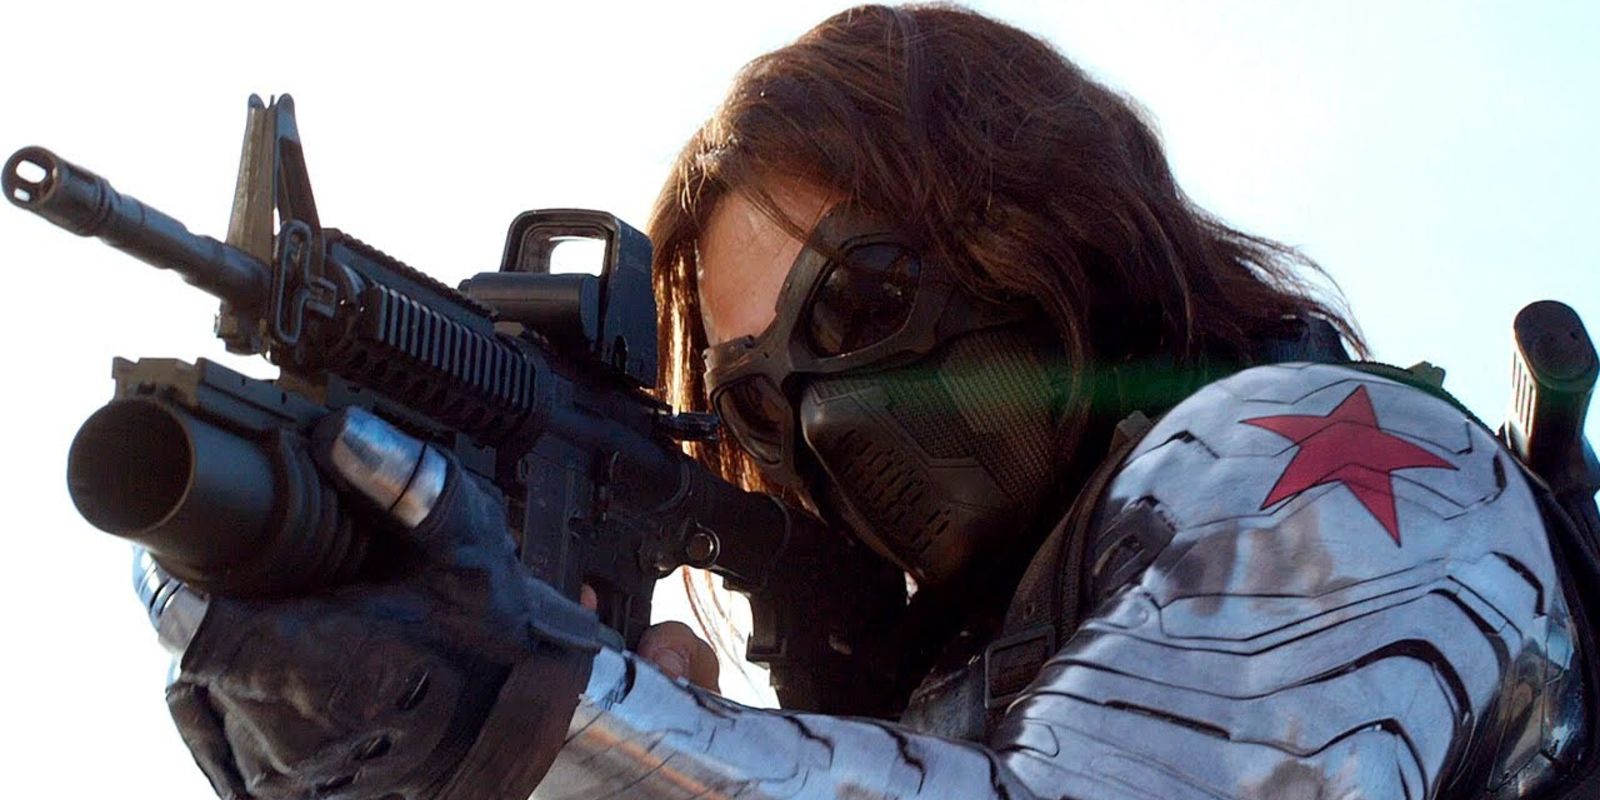 Winter Soldier aiming his assault rifle in Captain America: The Winter Soldier